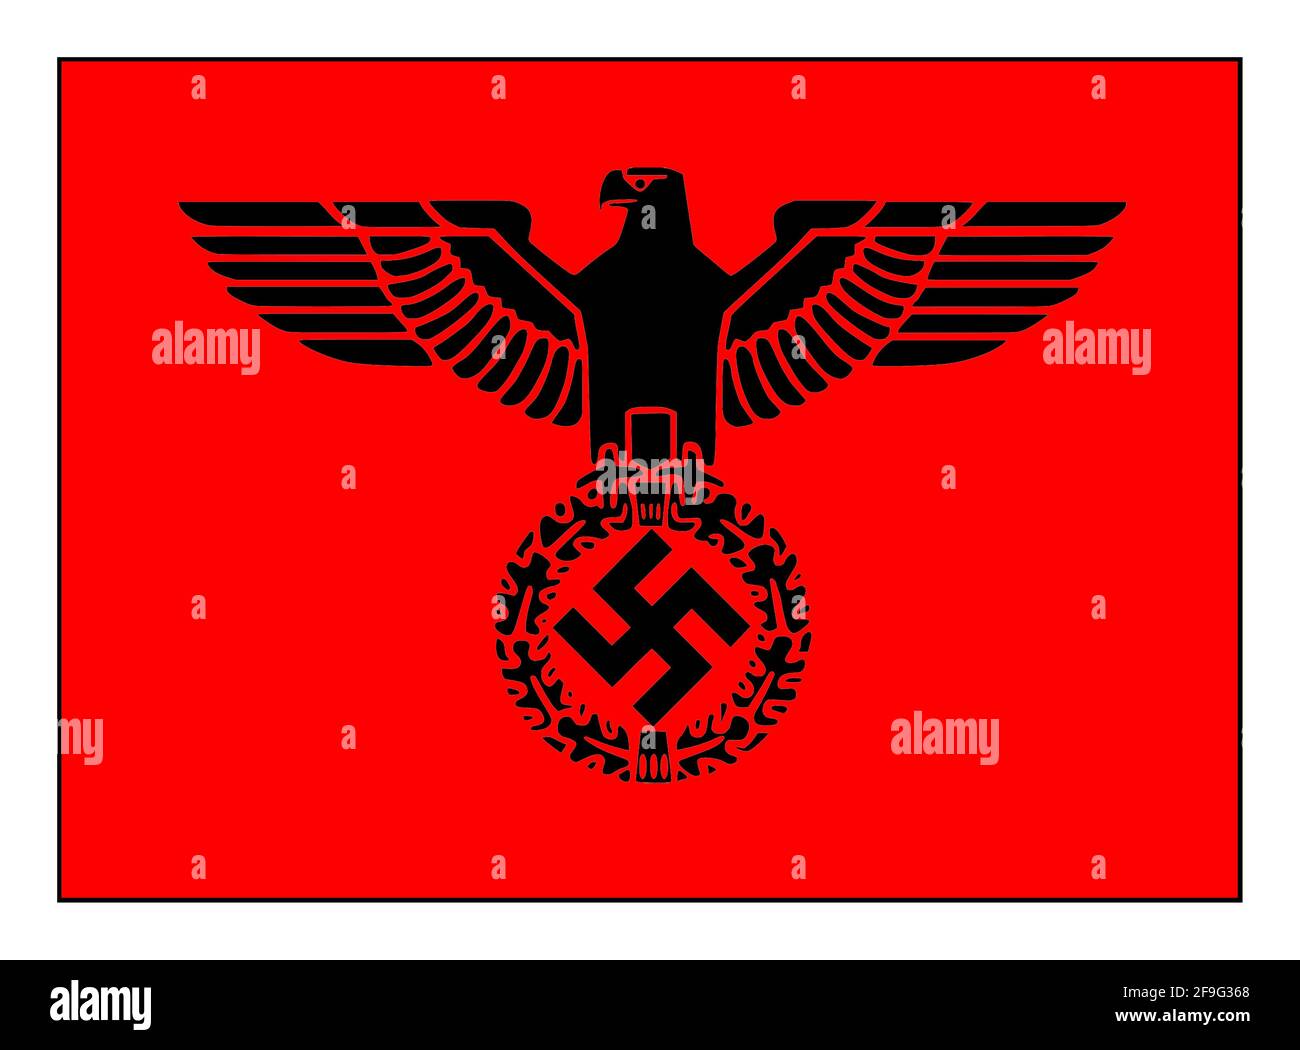 SWASTIKA EMBLEM The Parteiadler or Emblem of the Nationalsozialistische Deutsche Arbeiterpartei  known as the National Socialist (Nazi) Party NSDAP of Nazi Germany 1930's Stock Photo